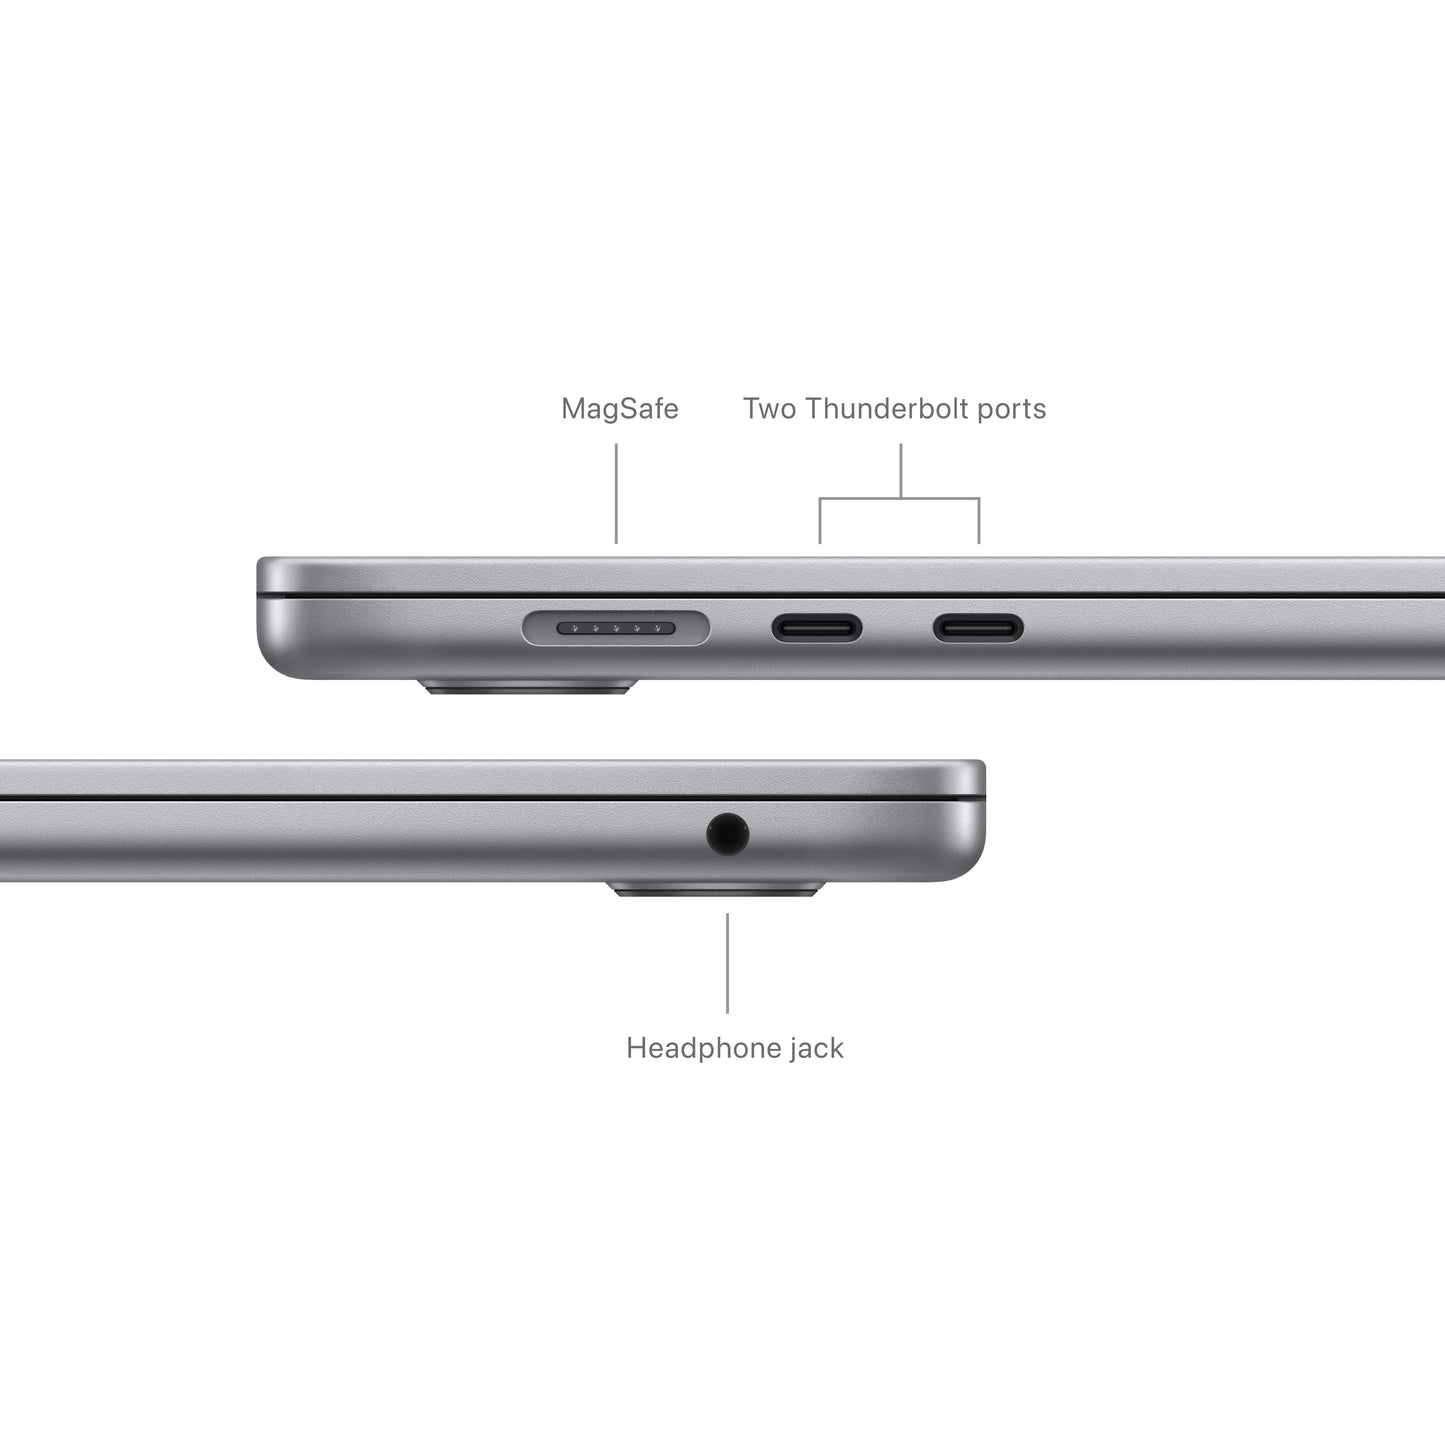 15-inch MacBook Air: Apple M3 chip with 8‑core CPU and 10‑core GPU, 512GB SSD - Space Grey